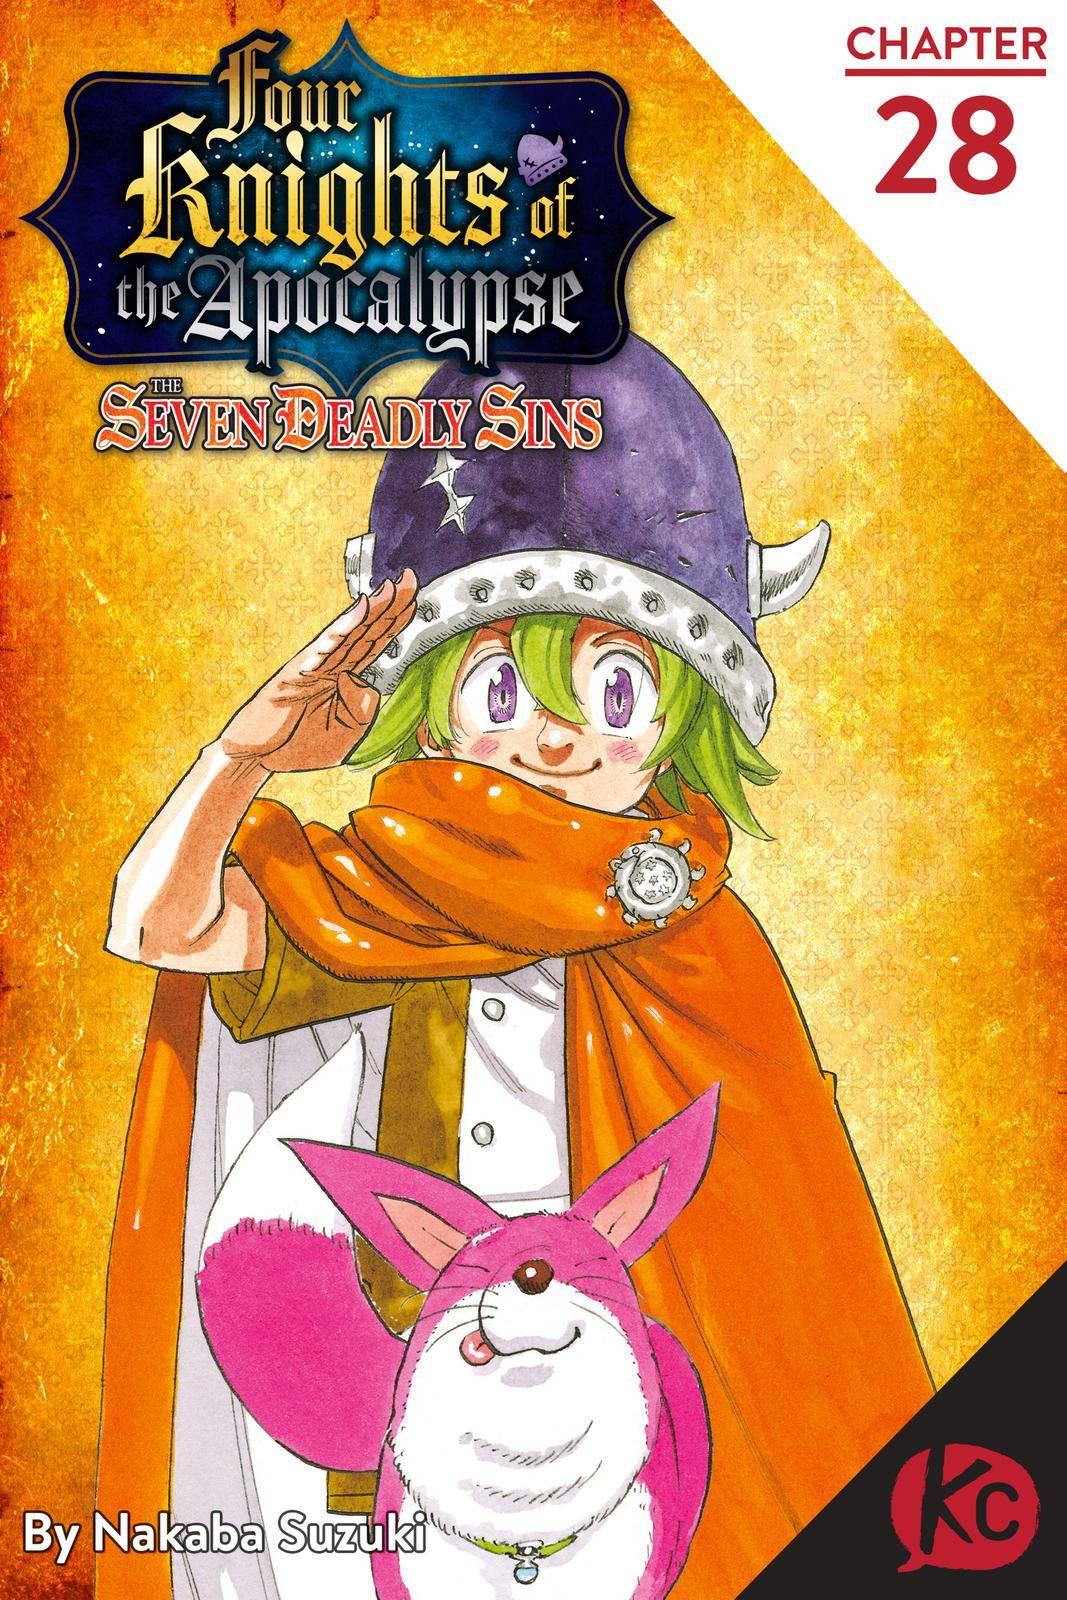 The Seven Deadly Sins: Four Knights of the Apocalypse Chapter 28